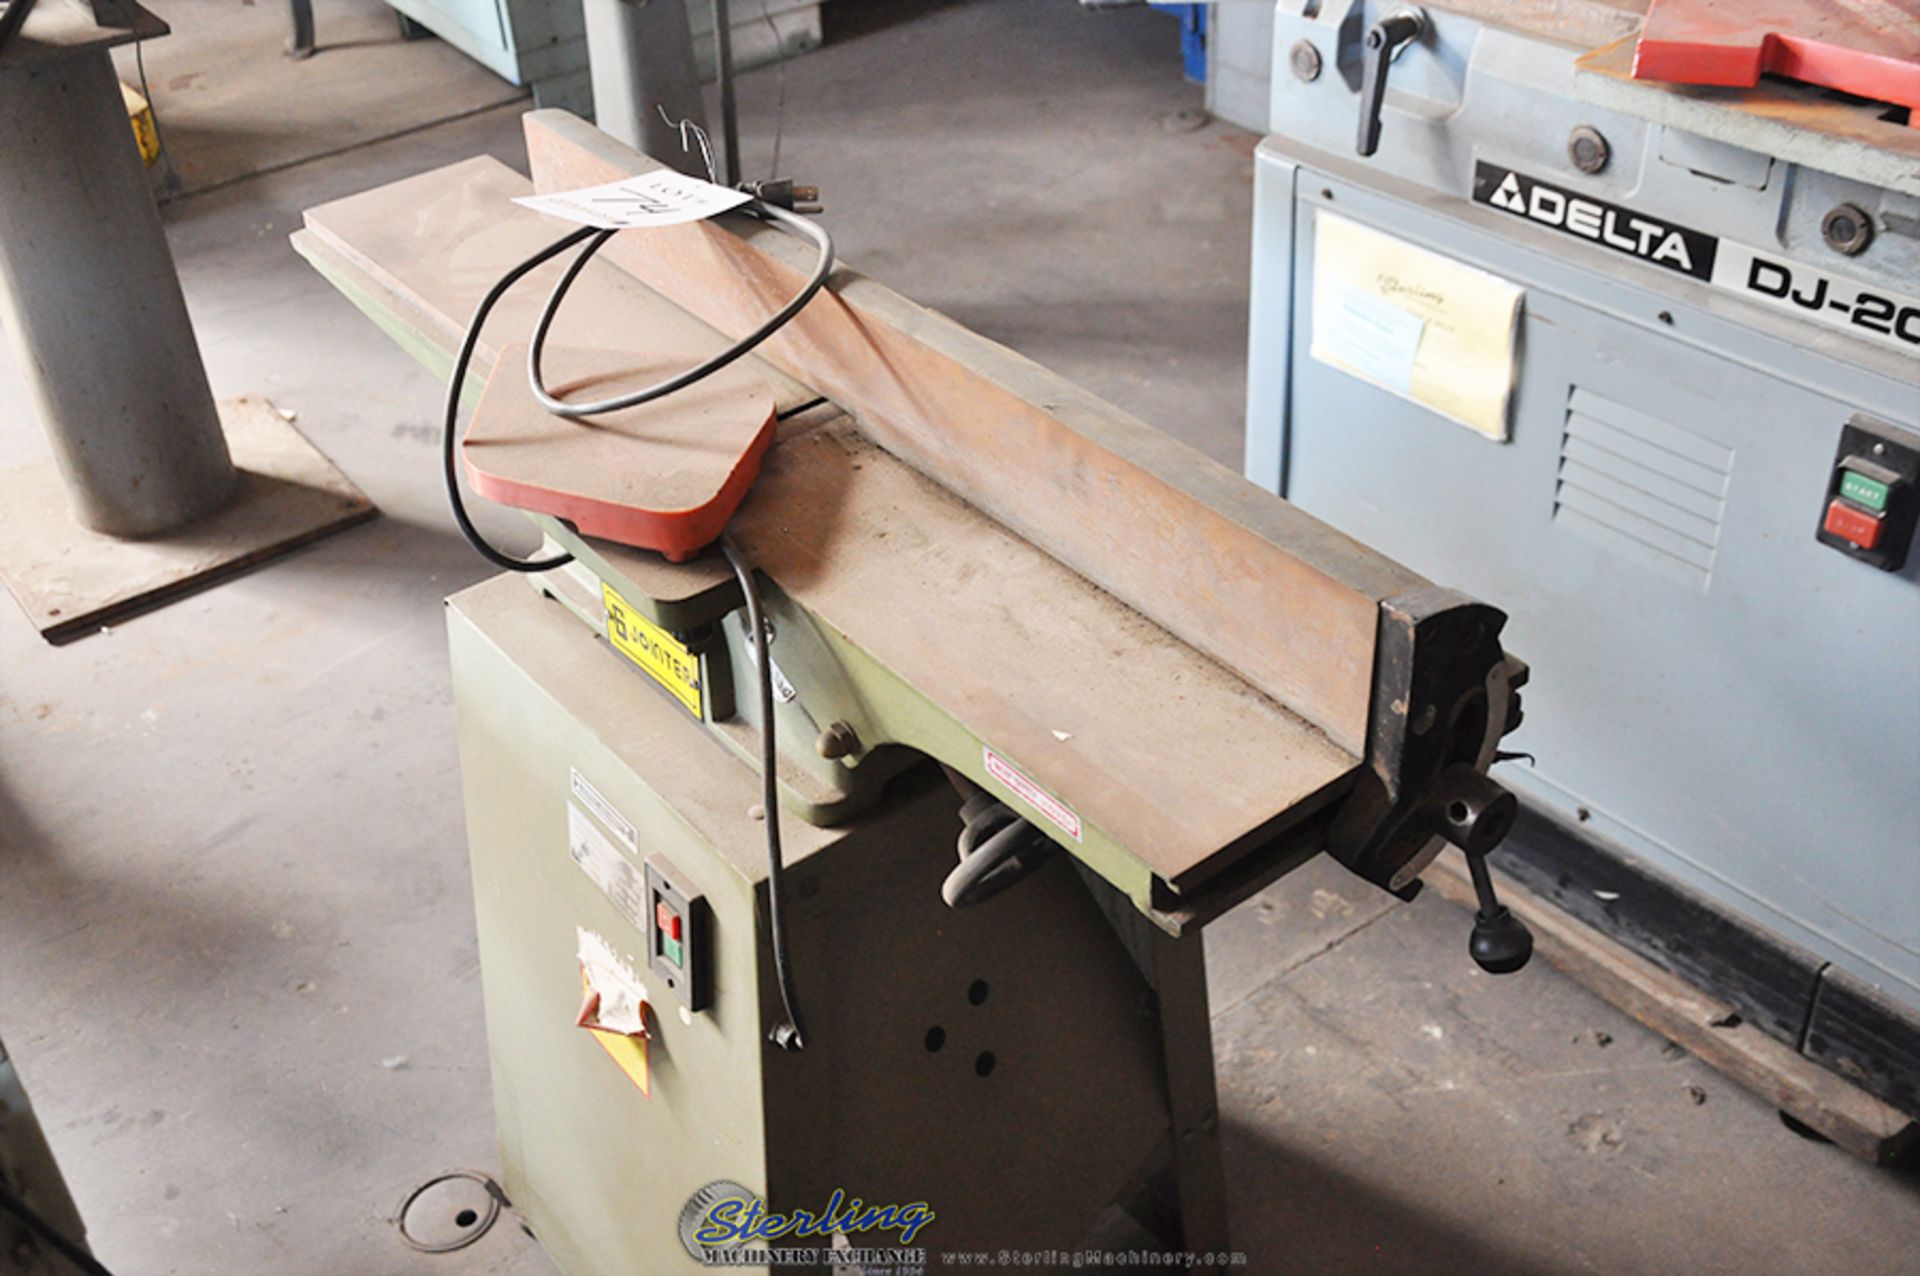 CENTRAL MACHINERY JOINTER, 30289 SKU - Image 2 of 2